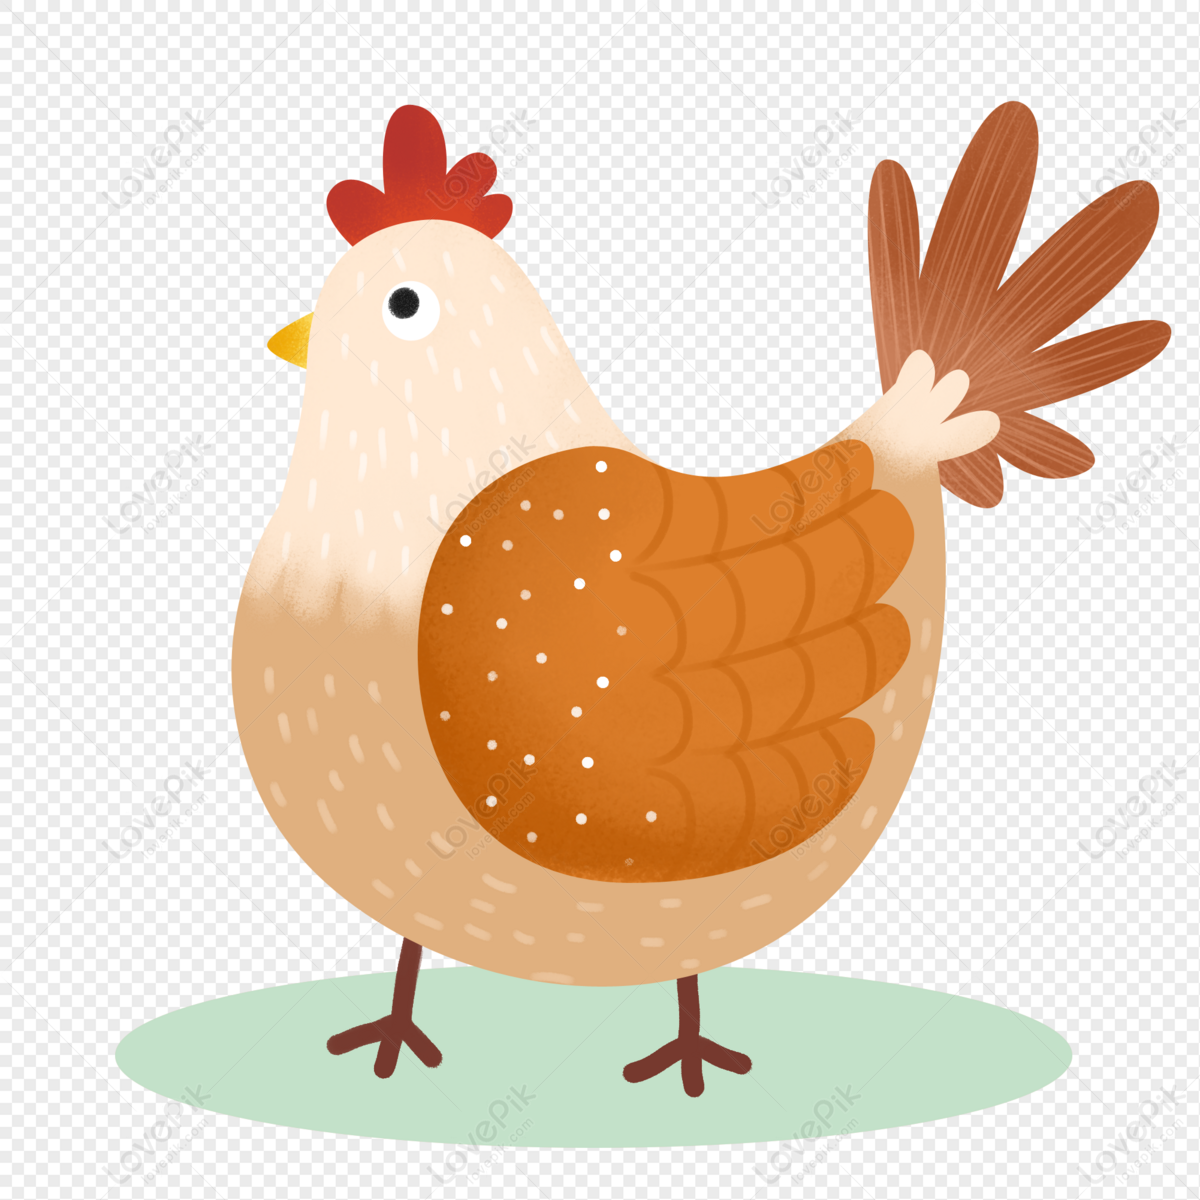 A chicken logo, simple, anime style, themed element of 